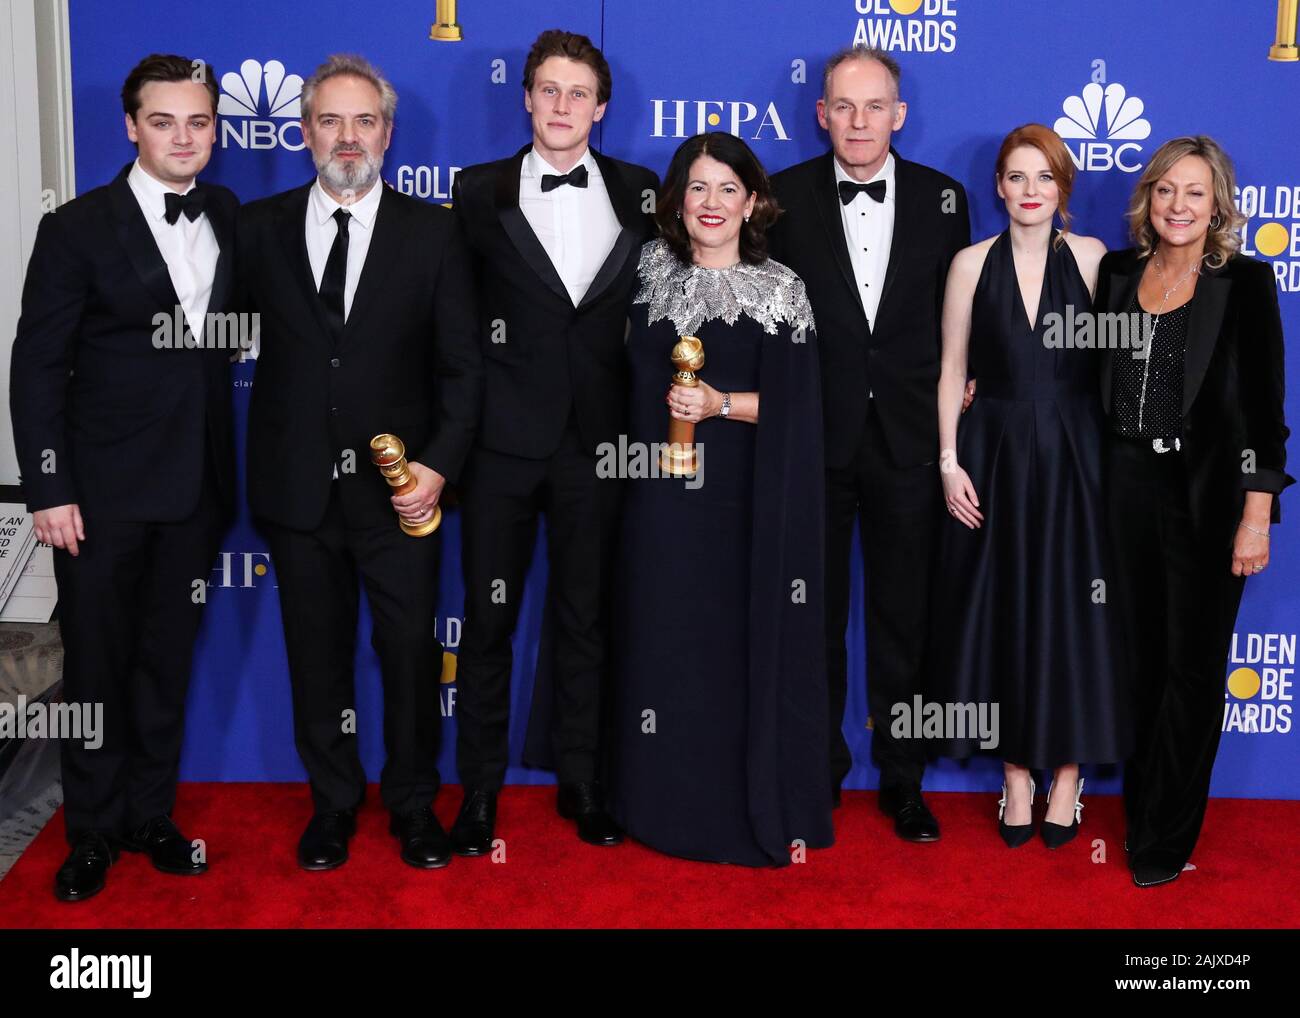 BEVERLY HILLS, LOS ANGELES, CALIFORNIA, USA - JANUARY 05: Dean-Charles Chapman, Sam Mendes, George MacKay, Pippa Harris, Callum McDougall, Krysty Wilson-Cairns and Jayne-Ann Tenggre pose in the press room at the 77th Annual Golden Globe Awards held at The Beverly Hilton Hotel on January 5, 2020 in Beverly Hills, Los Angeles, California, United States. (Photo by Xavier Collin/Image Press Agency) Stock Photo